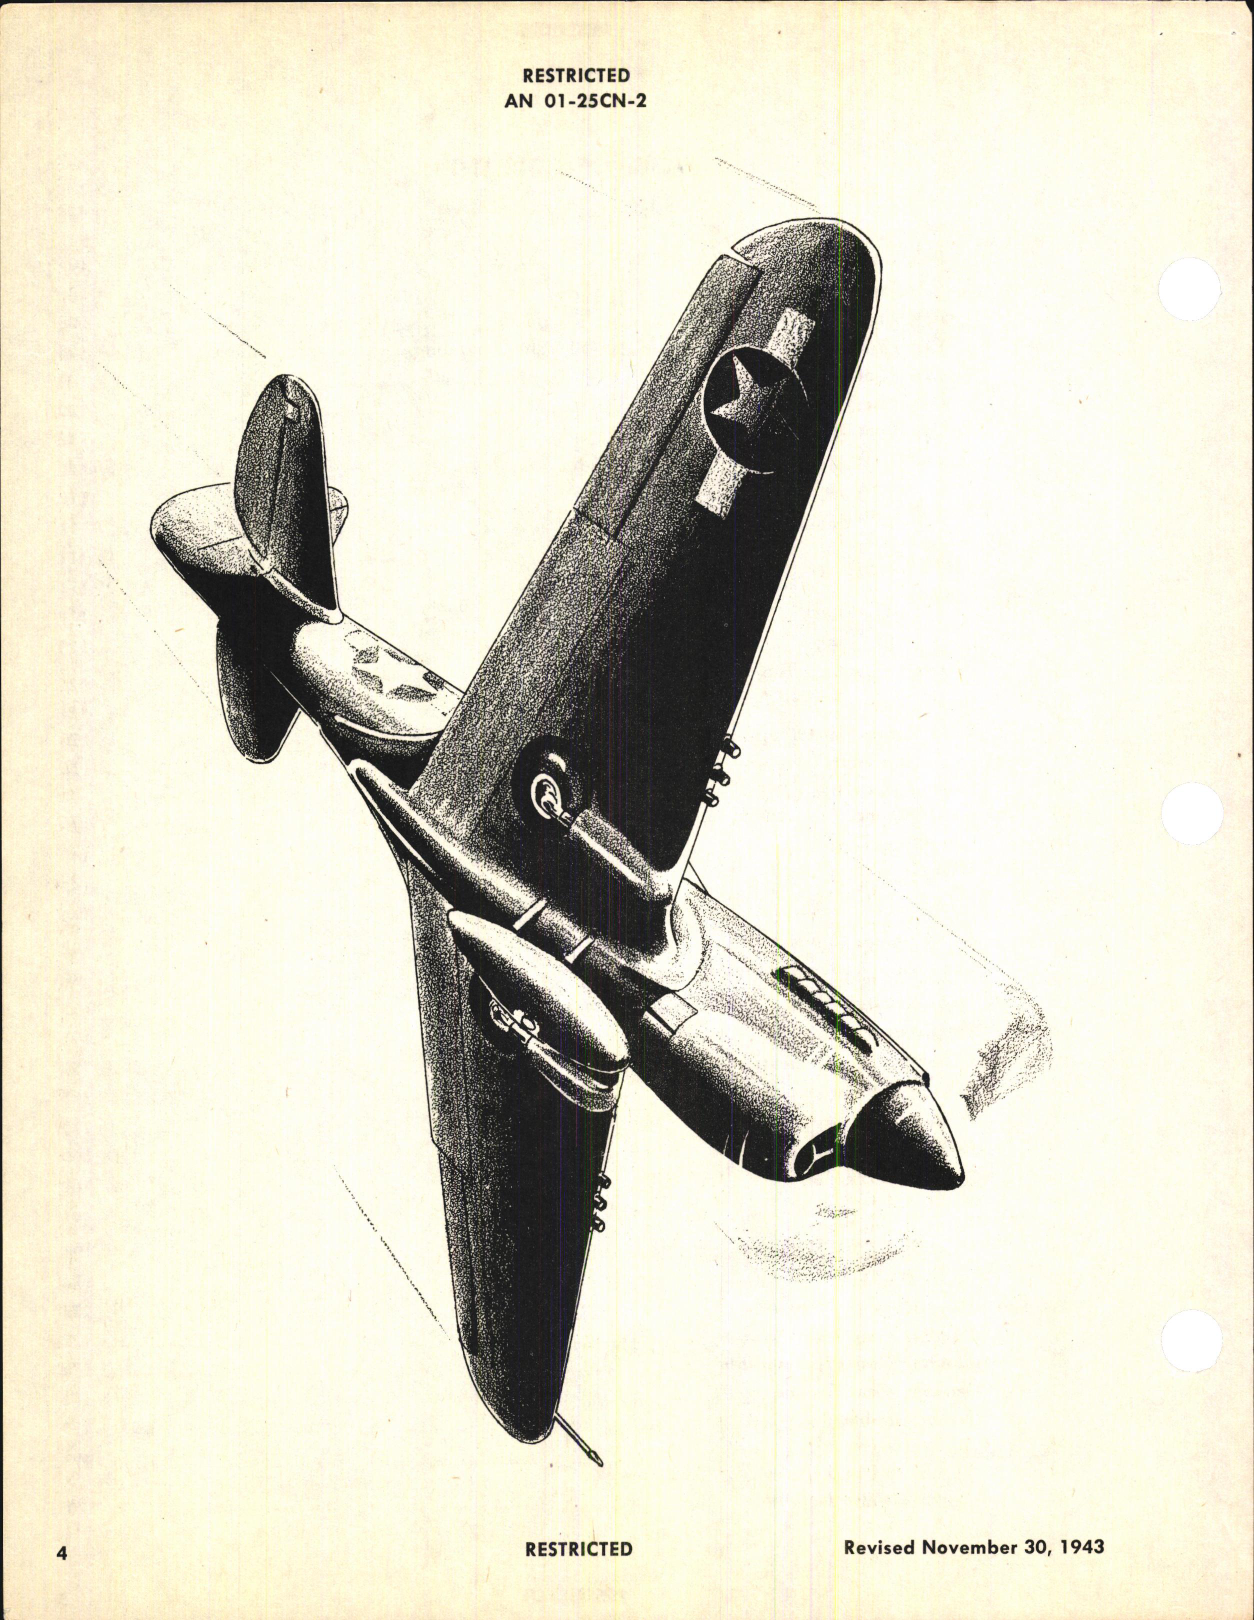 Sample page 6 from AirCorps Library document: Erection & Maintenance Instructions for P-40N Series, Kittyhawk IV